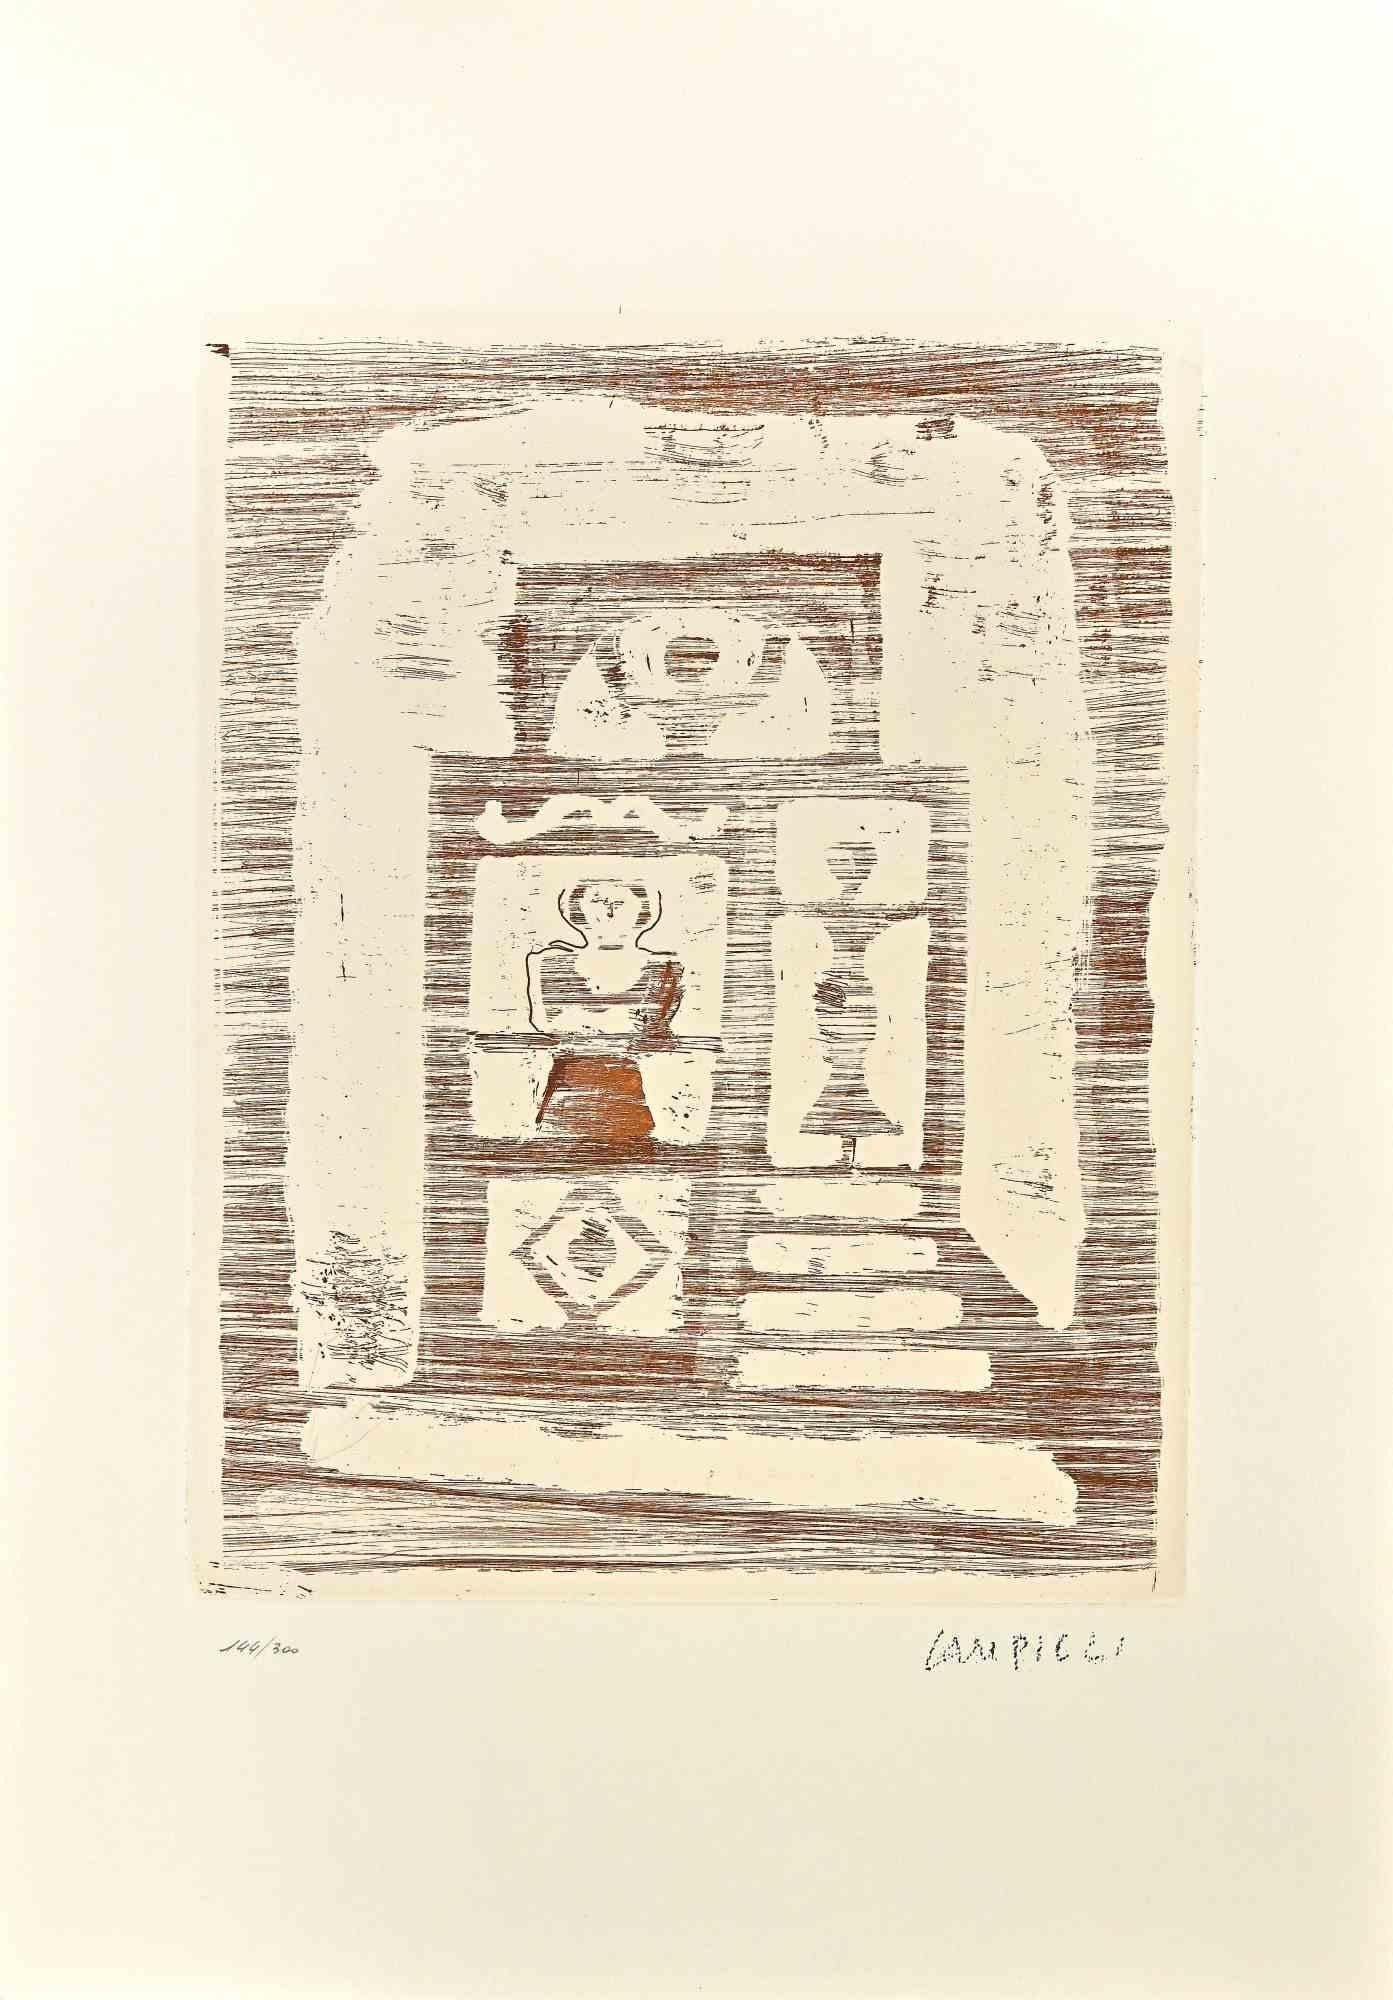 The House of Women  is a contemporary print realized by Massimo Campigli in the 1970s.

Etching on paper.

This artwork it is part of a series of works created in the last period of the artist and printed at the turn of the year of his death, which